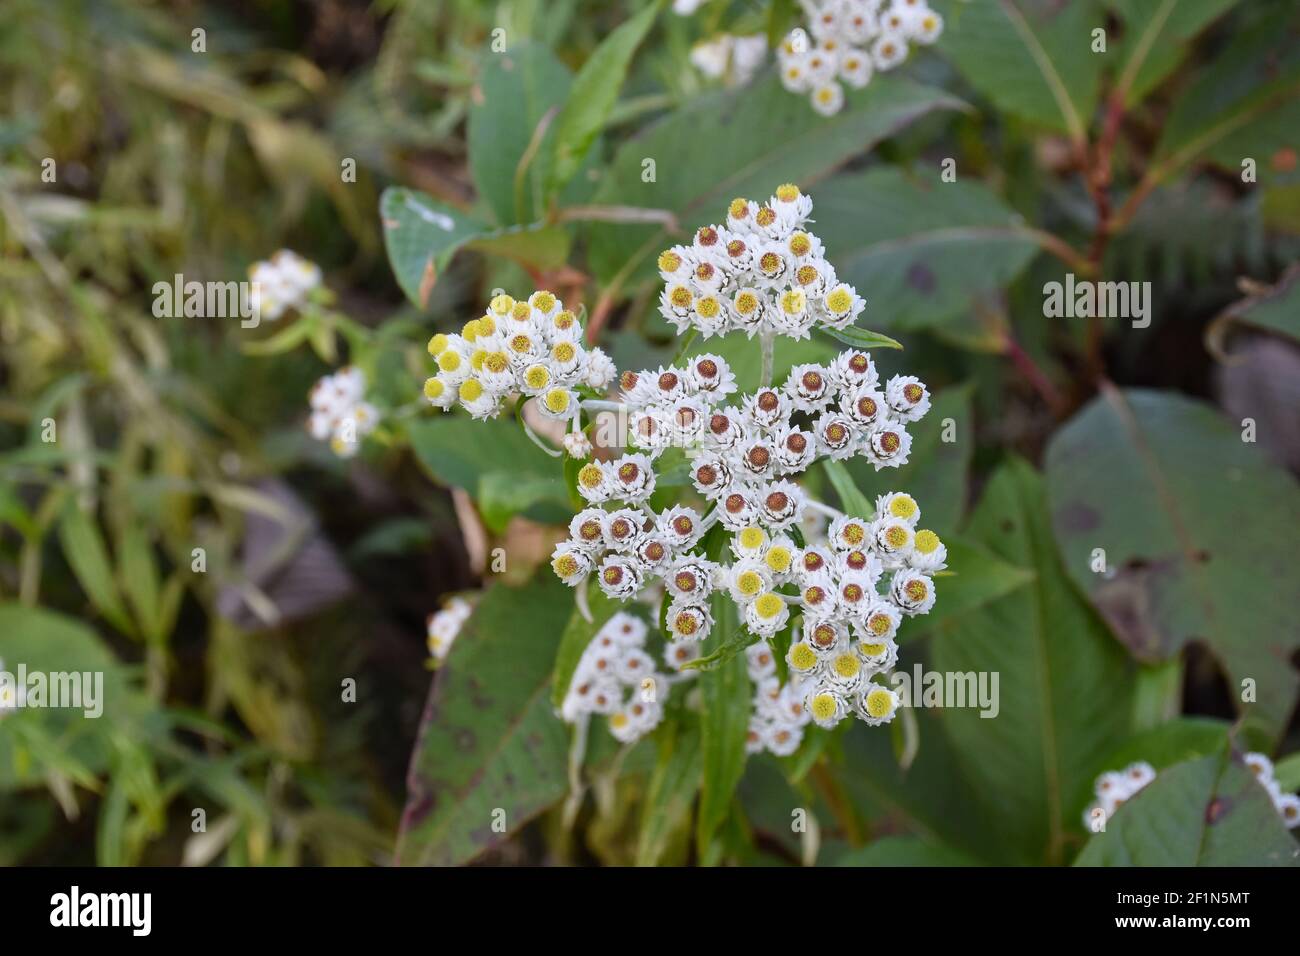 White and yellor color Himalyan Wild Anaphalis Flower Stock Photo